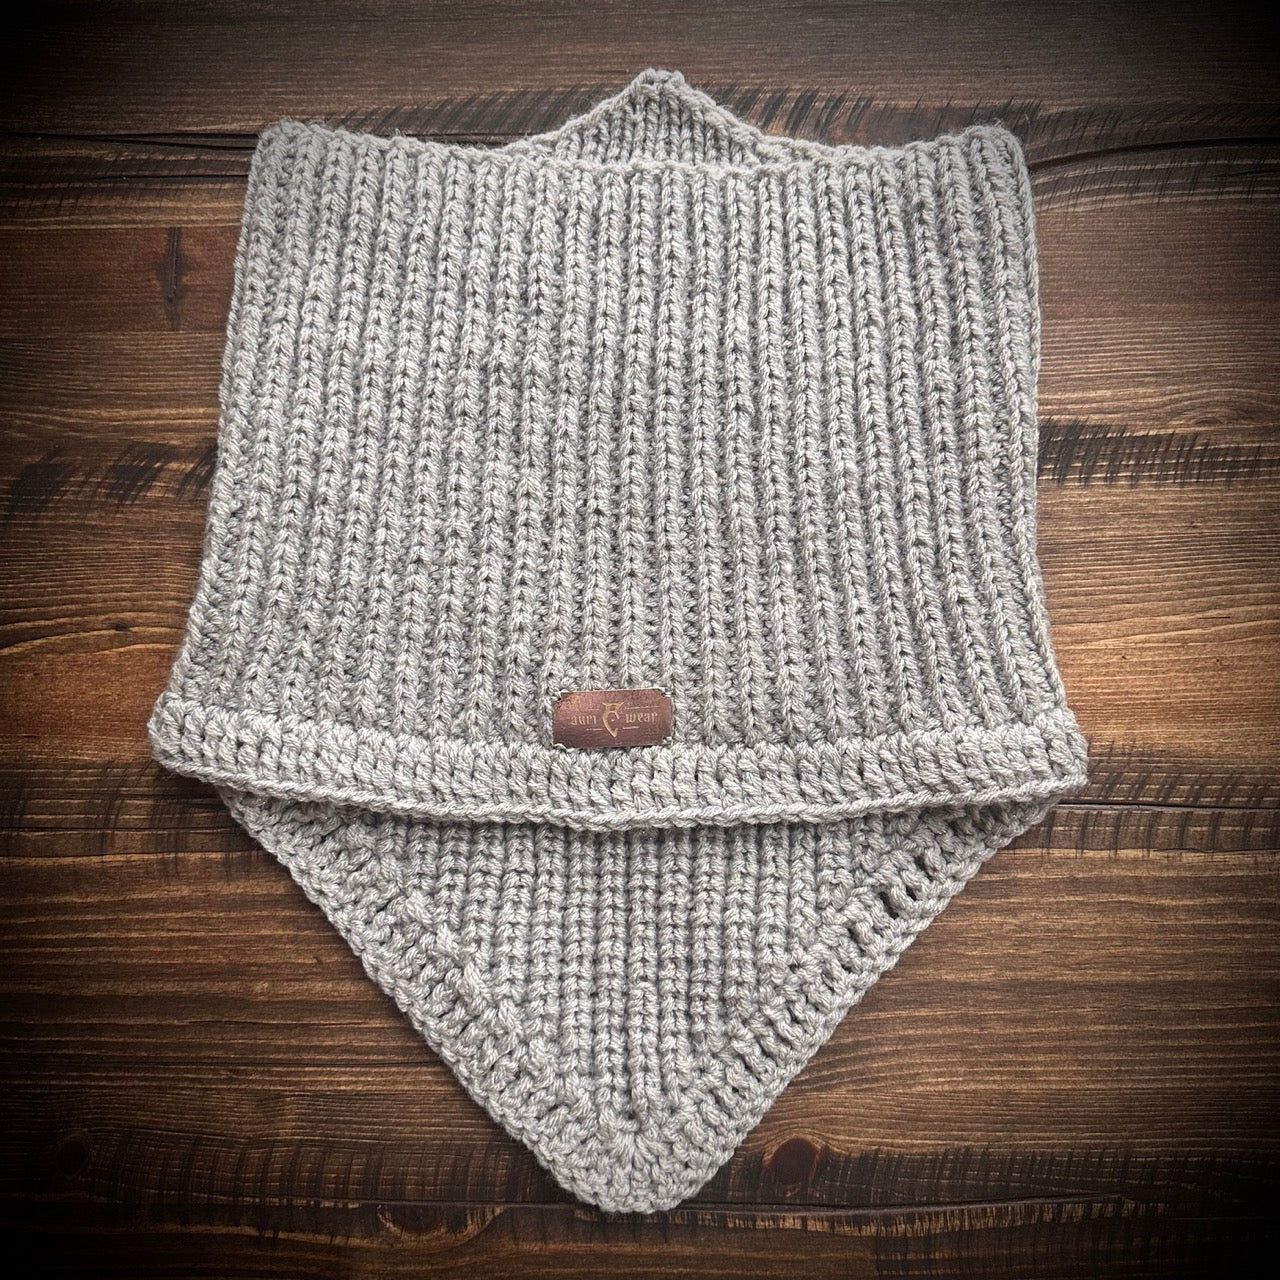 handmade knitted sparkling grey cowl